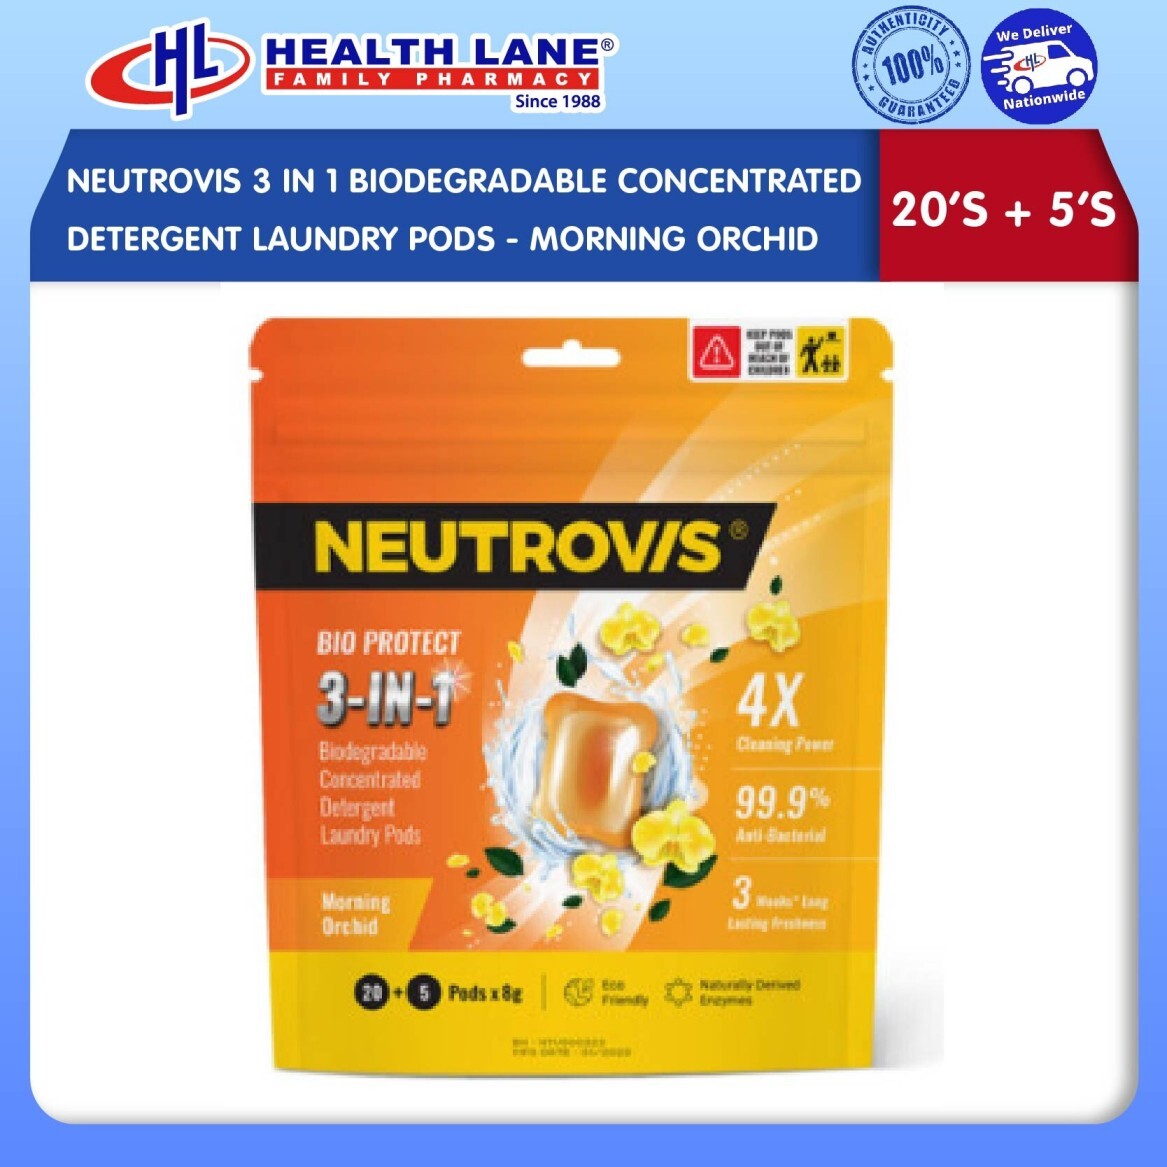 NEUTROVIS 3 IN 1 BIODEGRADABLE CONCENTRATED DETERGENT LAUNDRY PODS (20'S + 5'S) - MORNING ORCHID